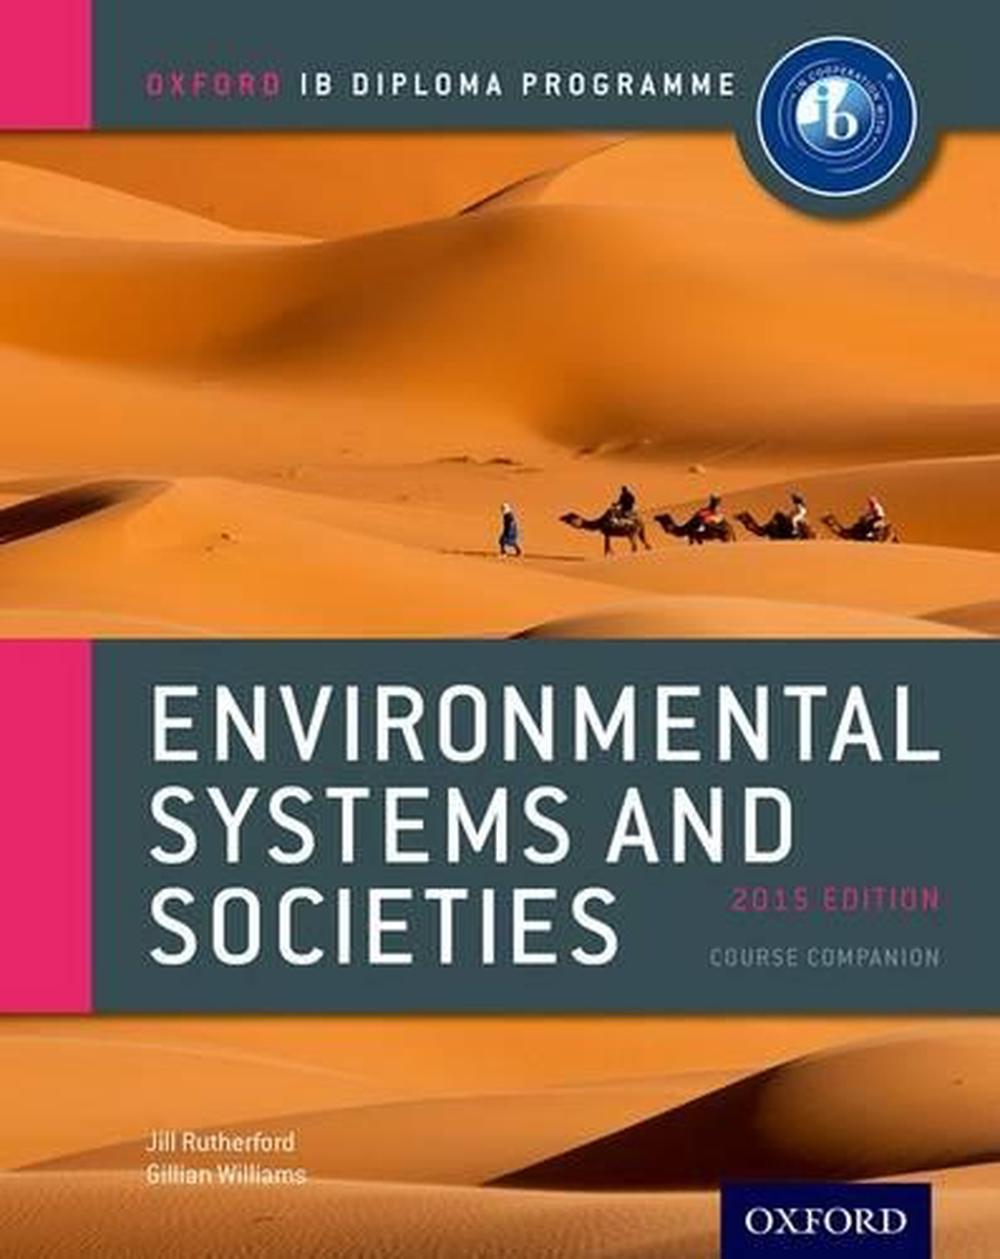 environmental systems and societies textbook answers